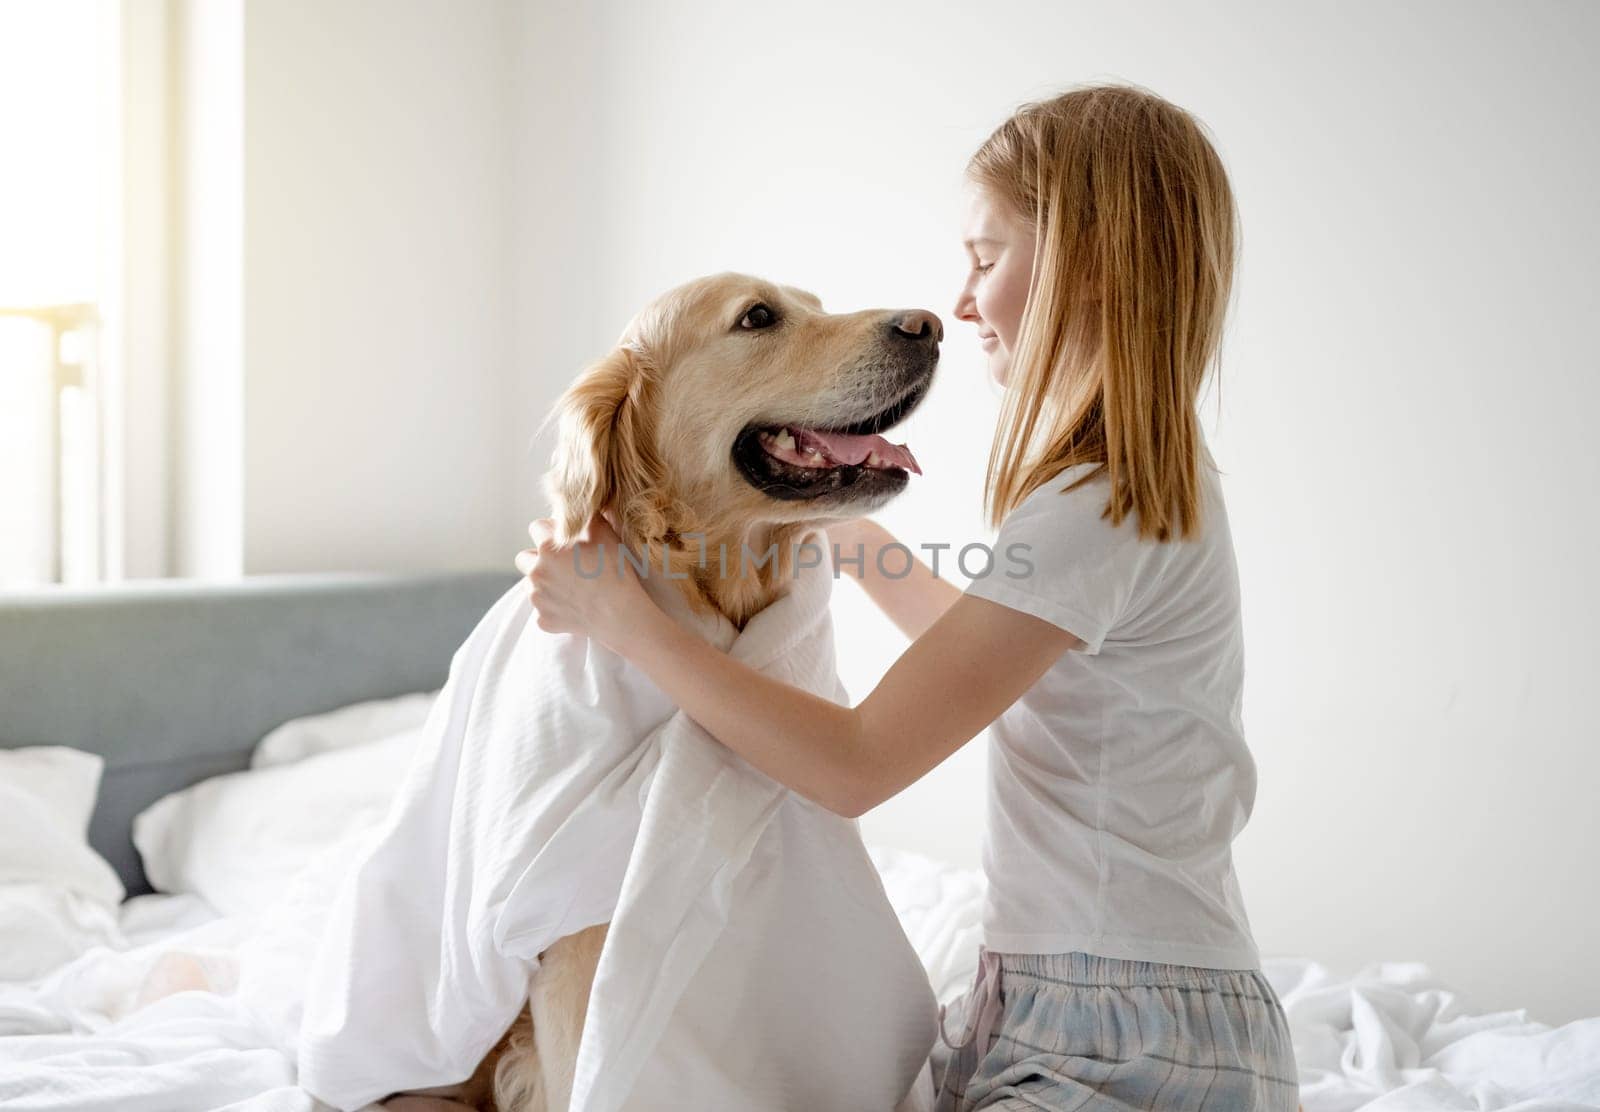 Girl Plays With Golden Retriever On Bed, Covering It With Blanket by tan4ikk1